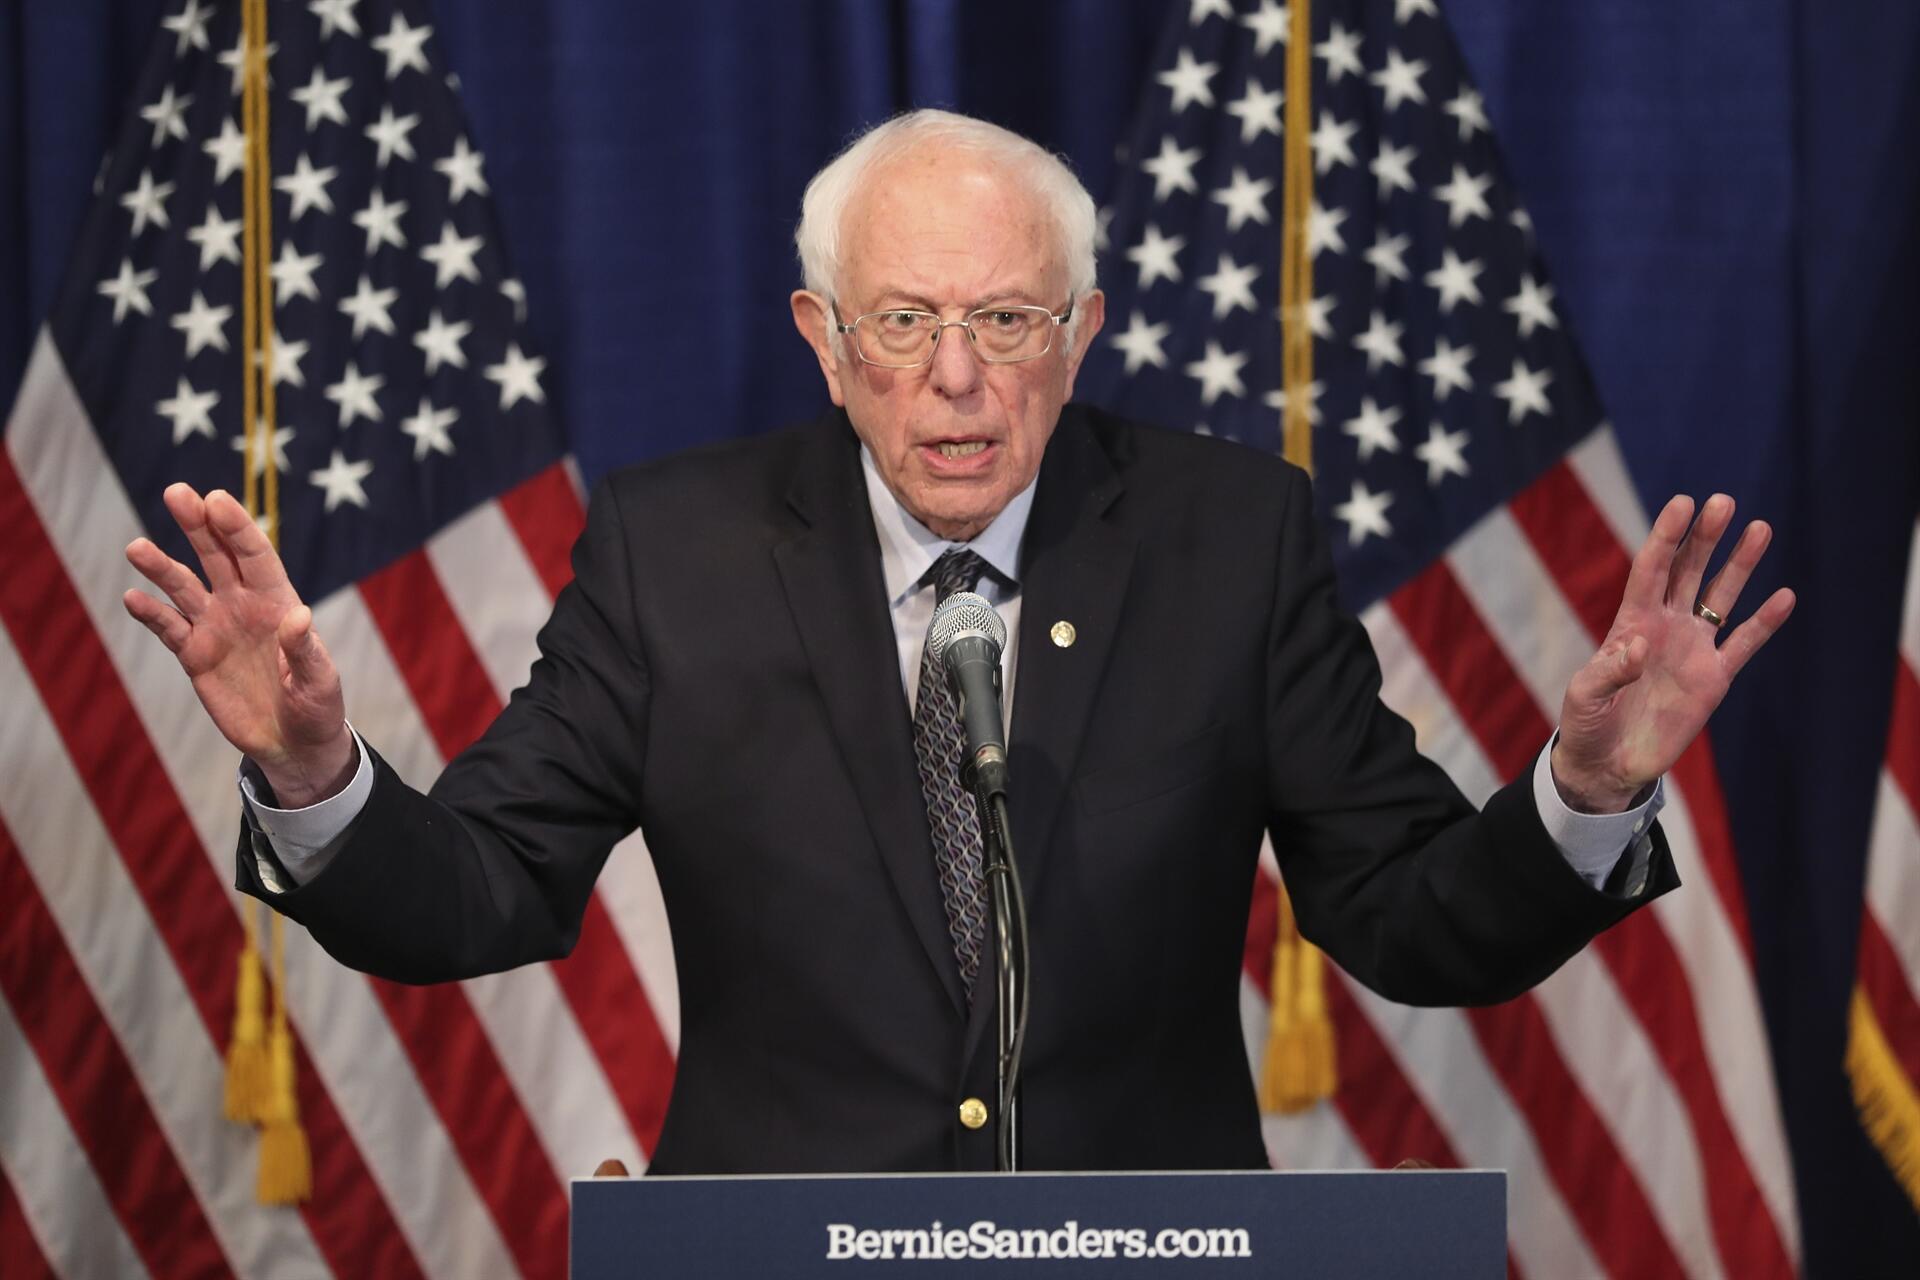 Bernie Sanders says he's moving ahead with his Dem campaign World News